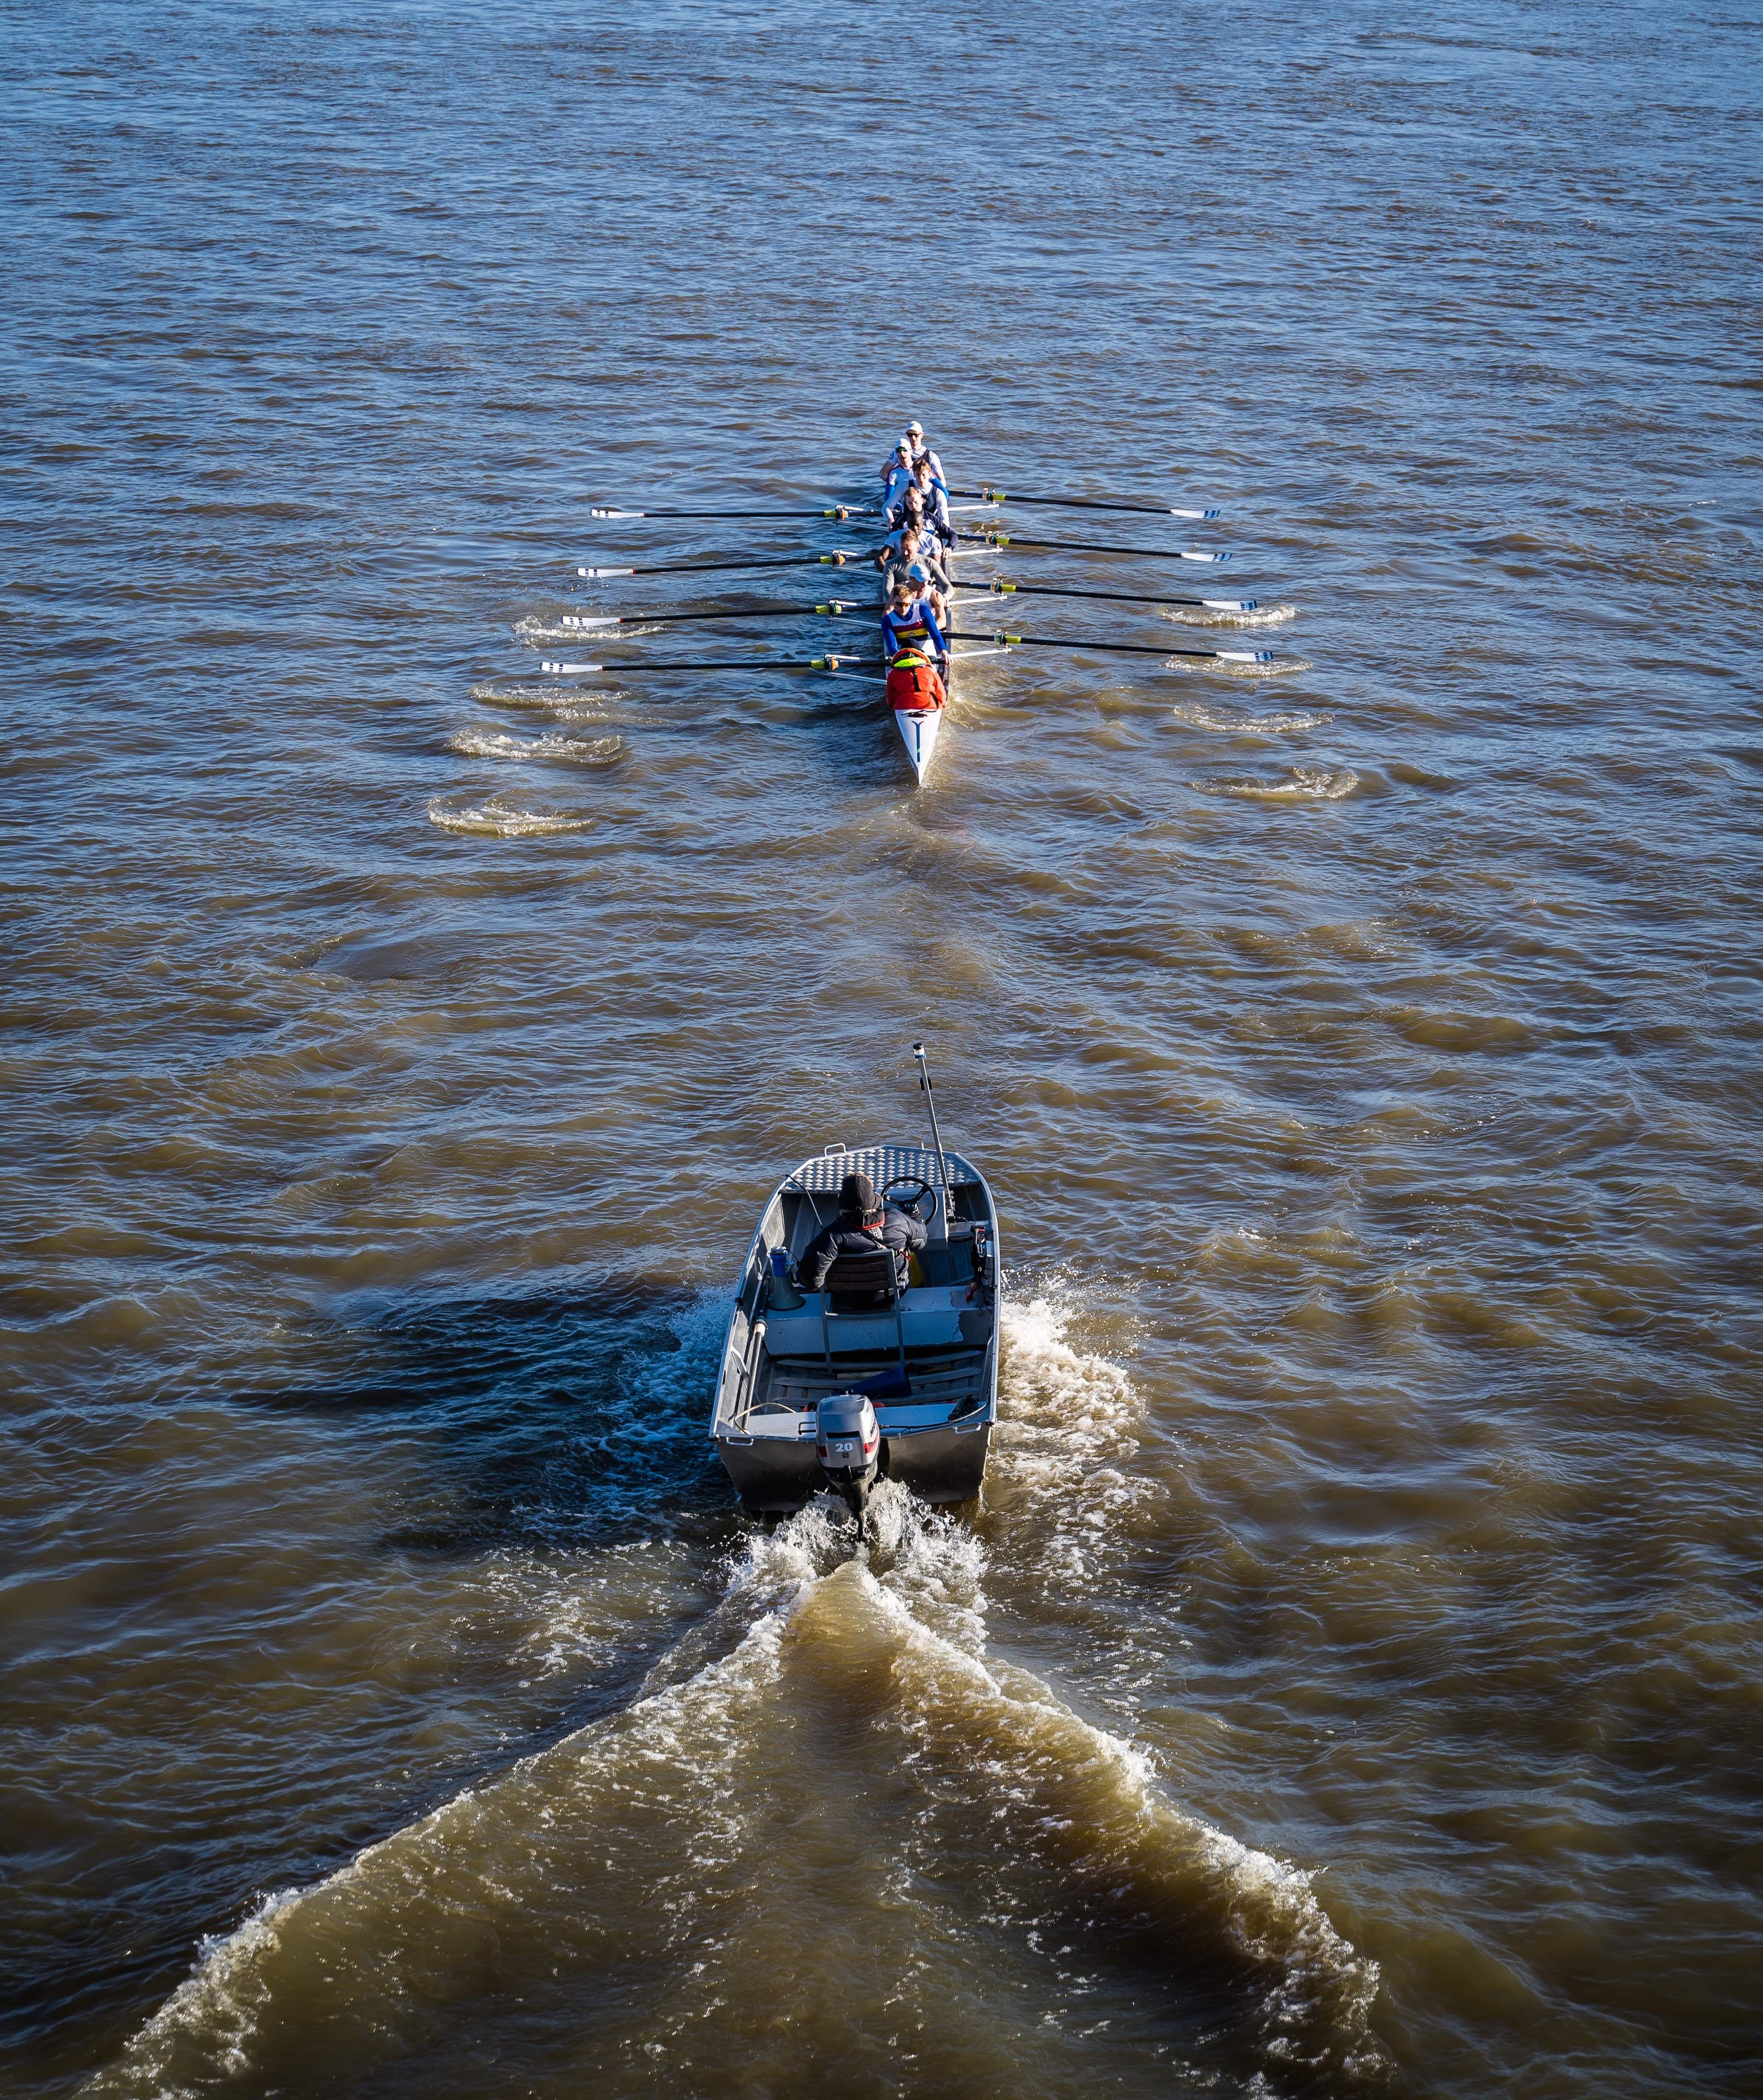 Scullers on the Thames seen from the Barnes Railway Bridge, London, UK